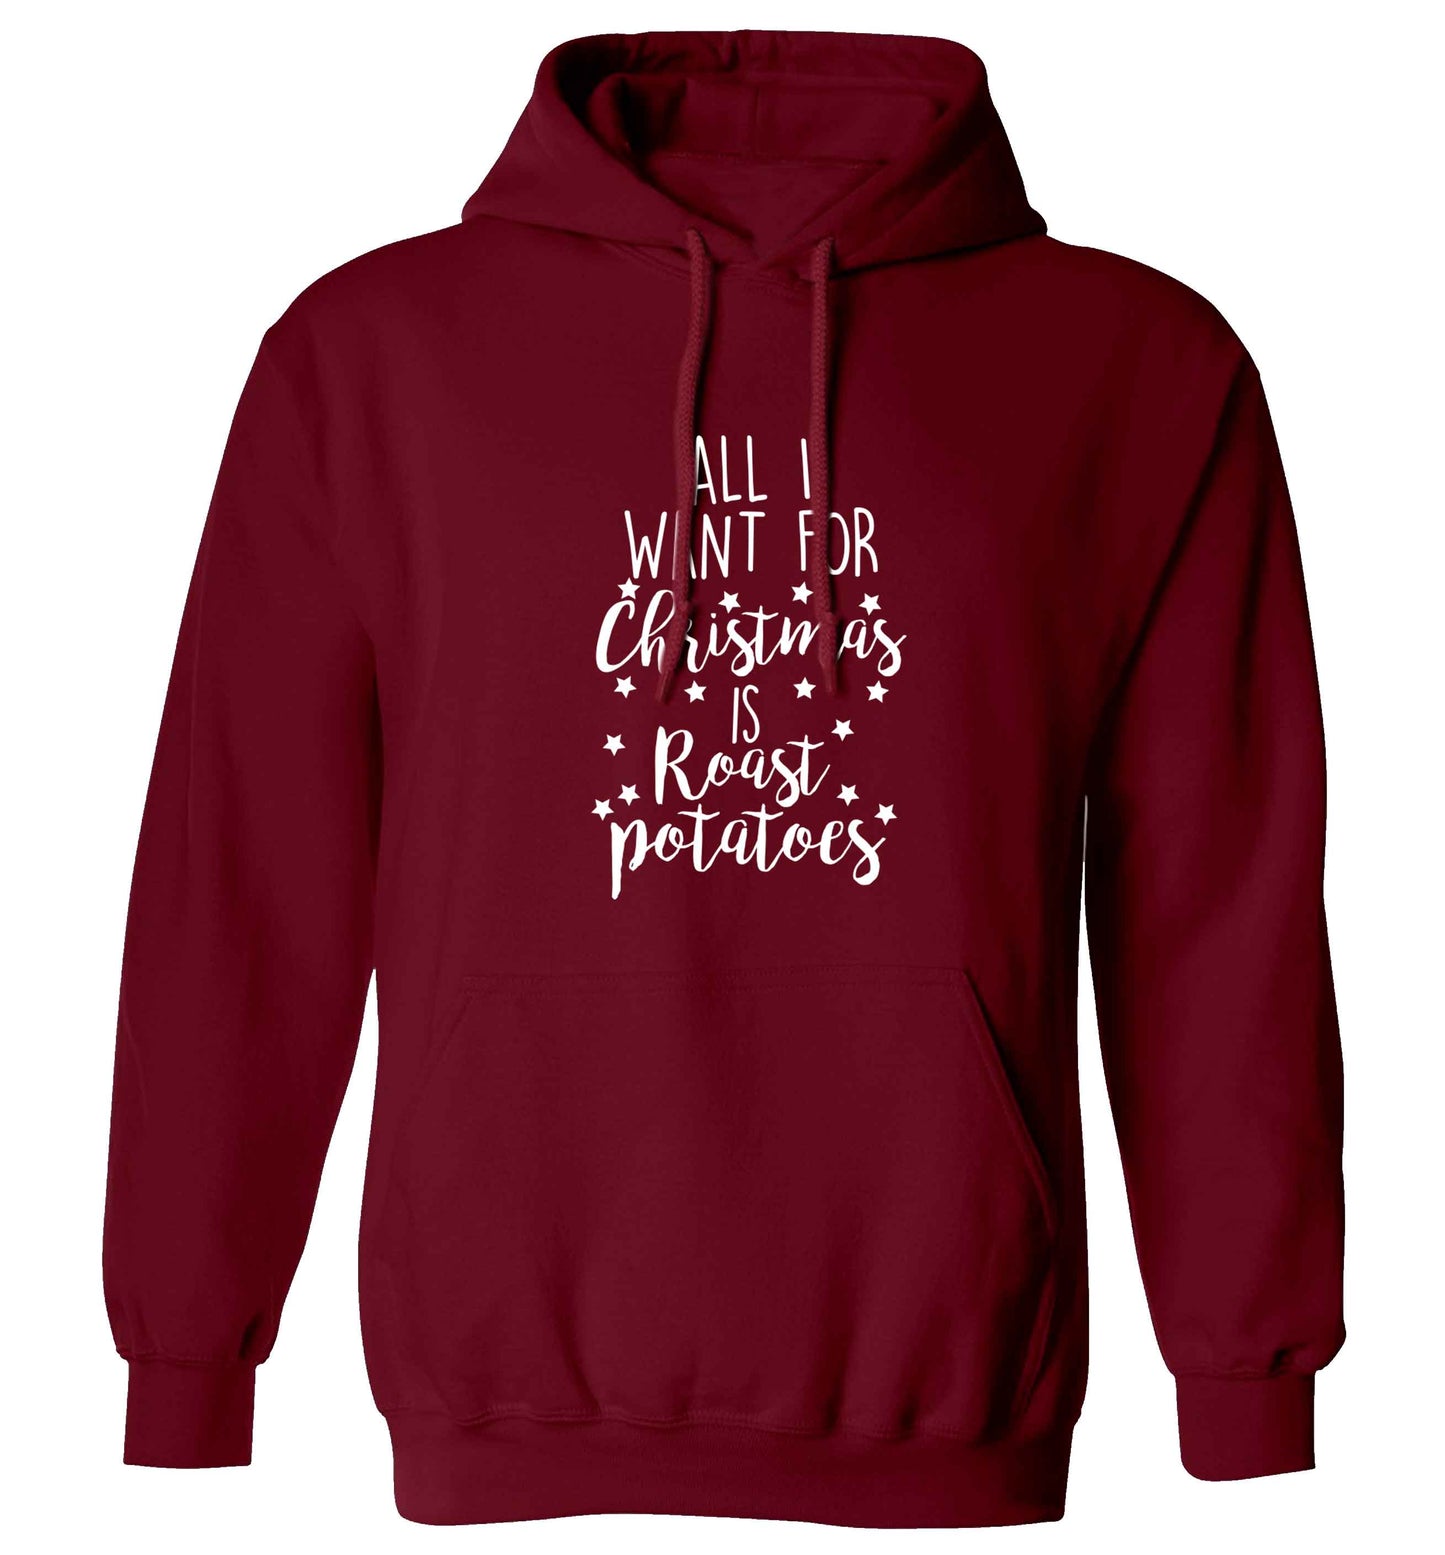 All I want for Christmas is roast potatoes adults unisex maroon hoodie 2XL